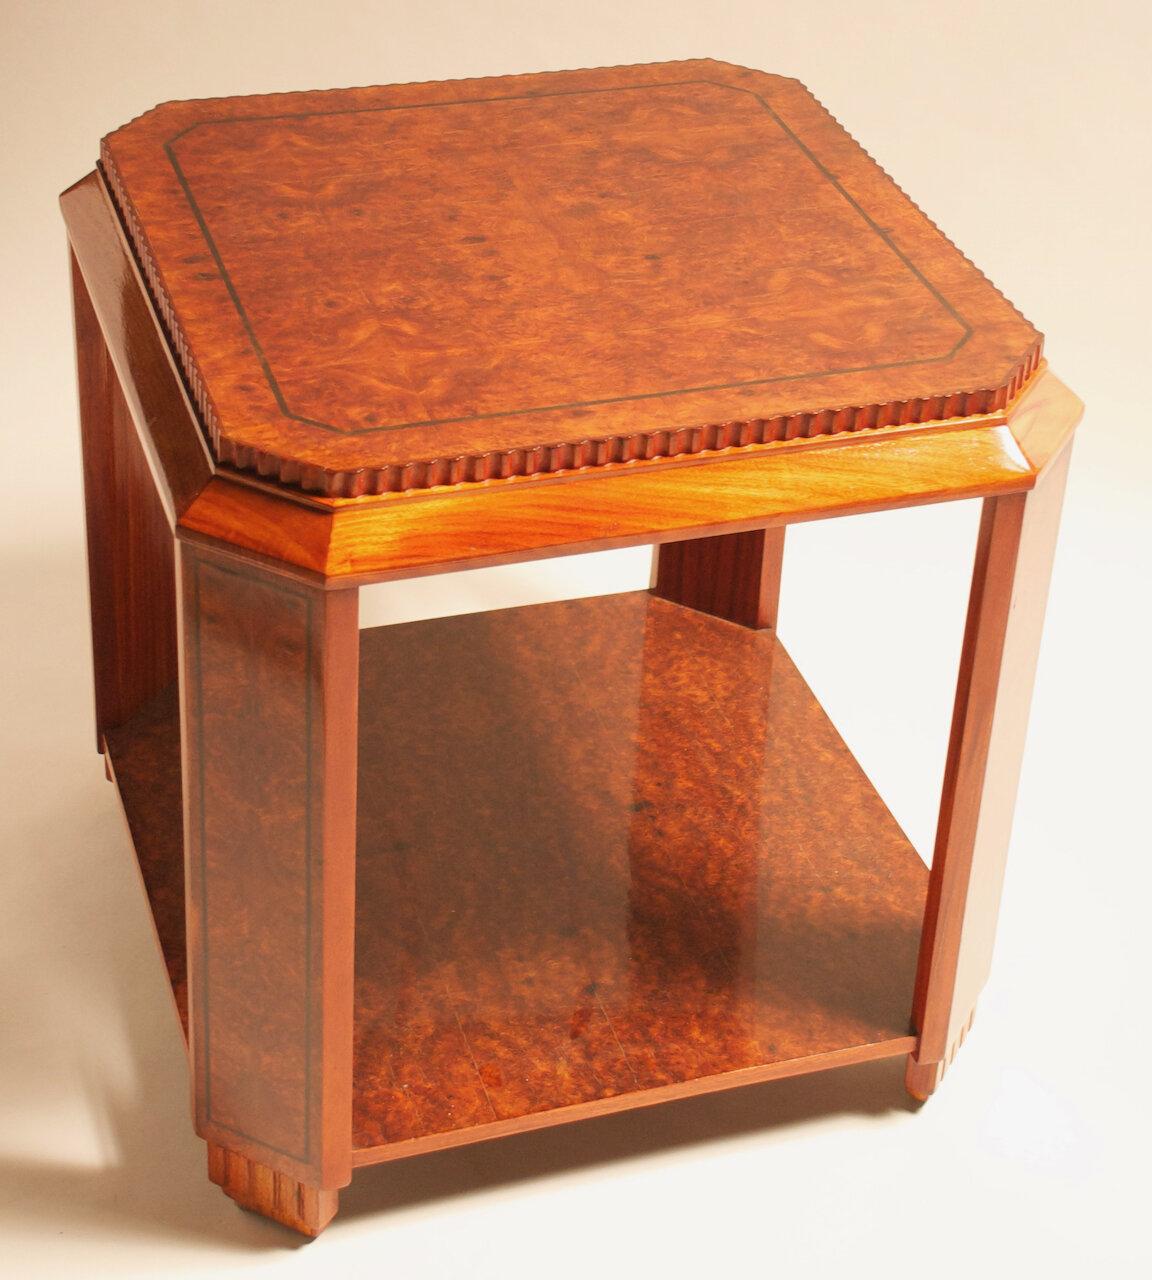 French Modernist side/end table in burled walnut and babinga with inlays in ebony. Circa 1928. 25